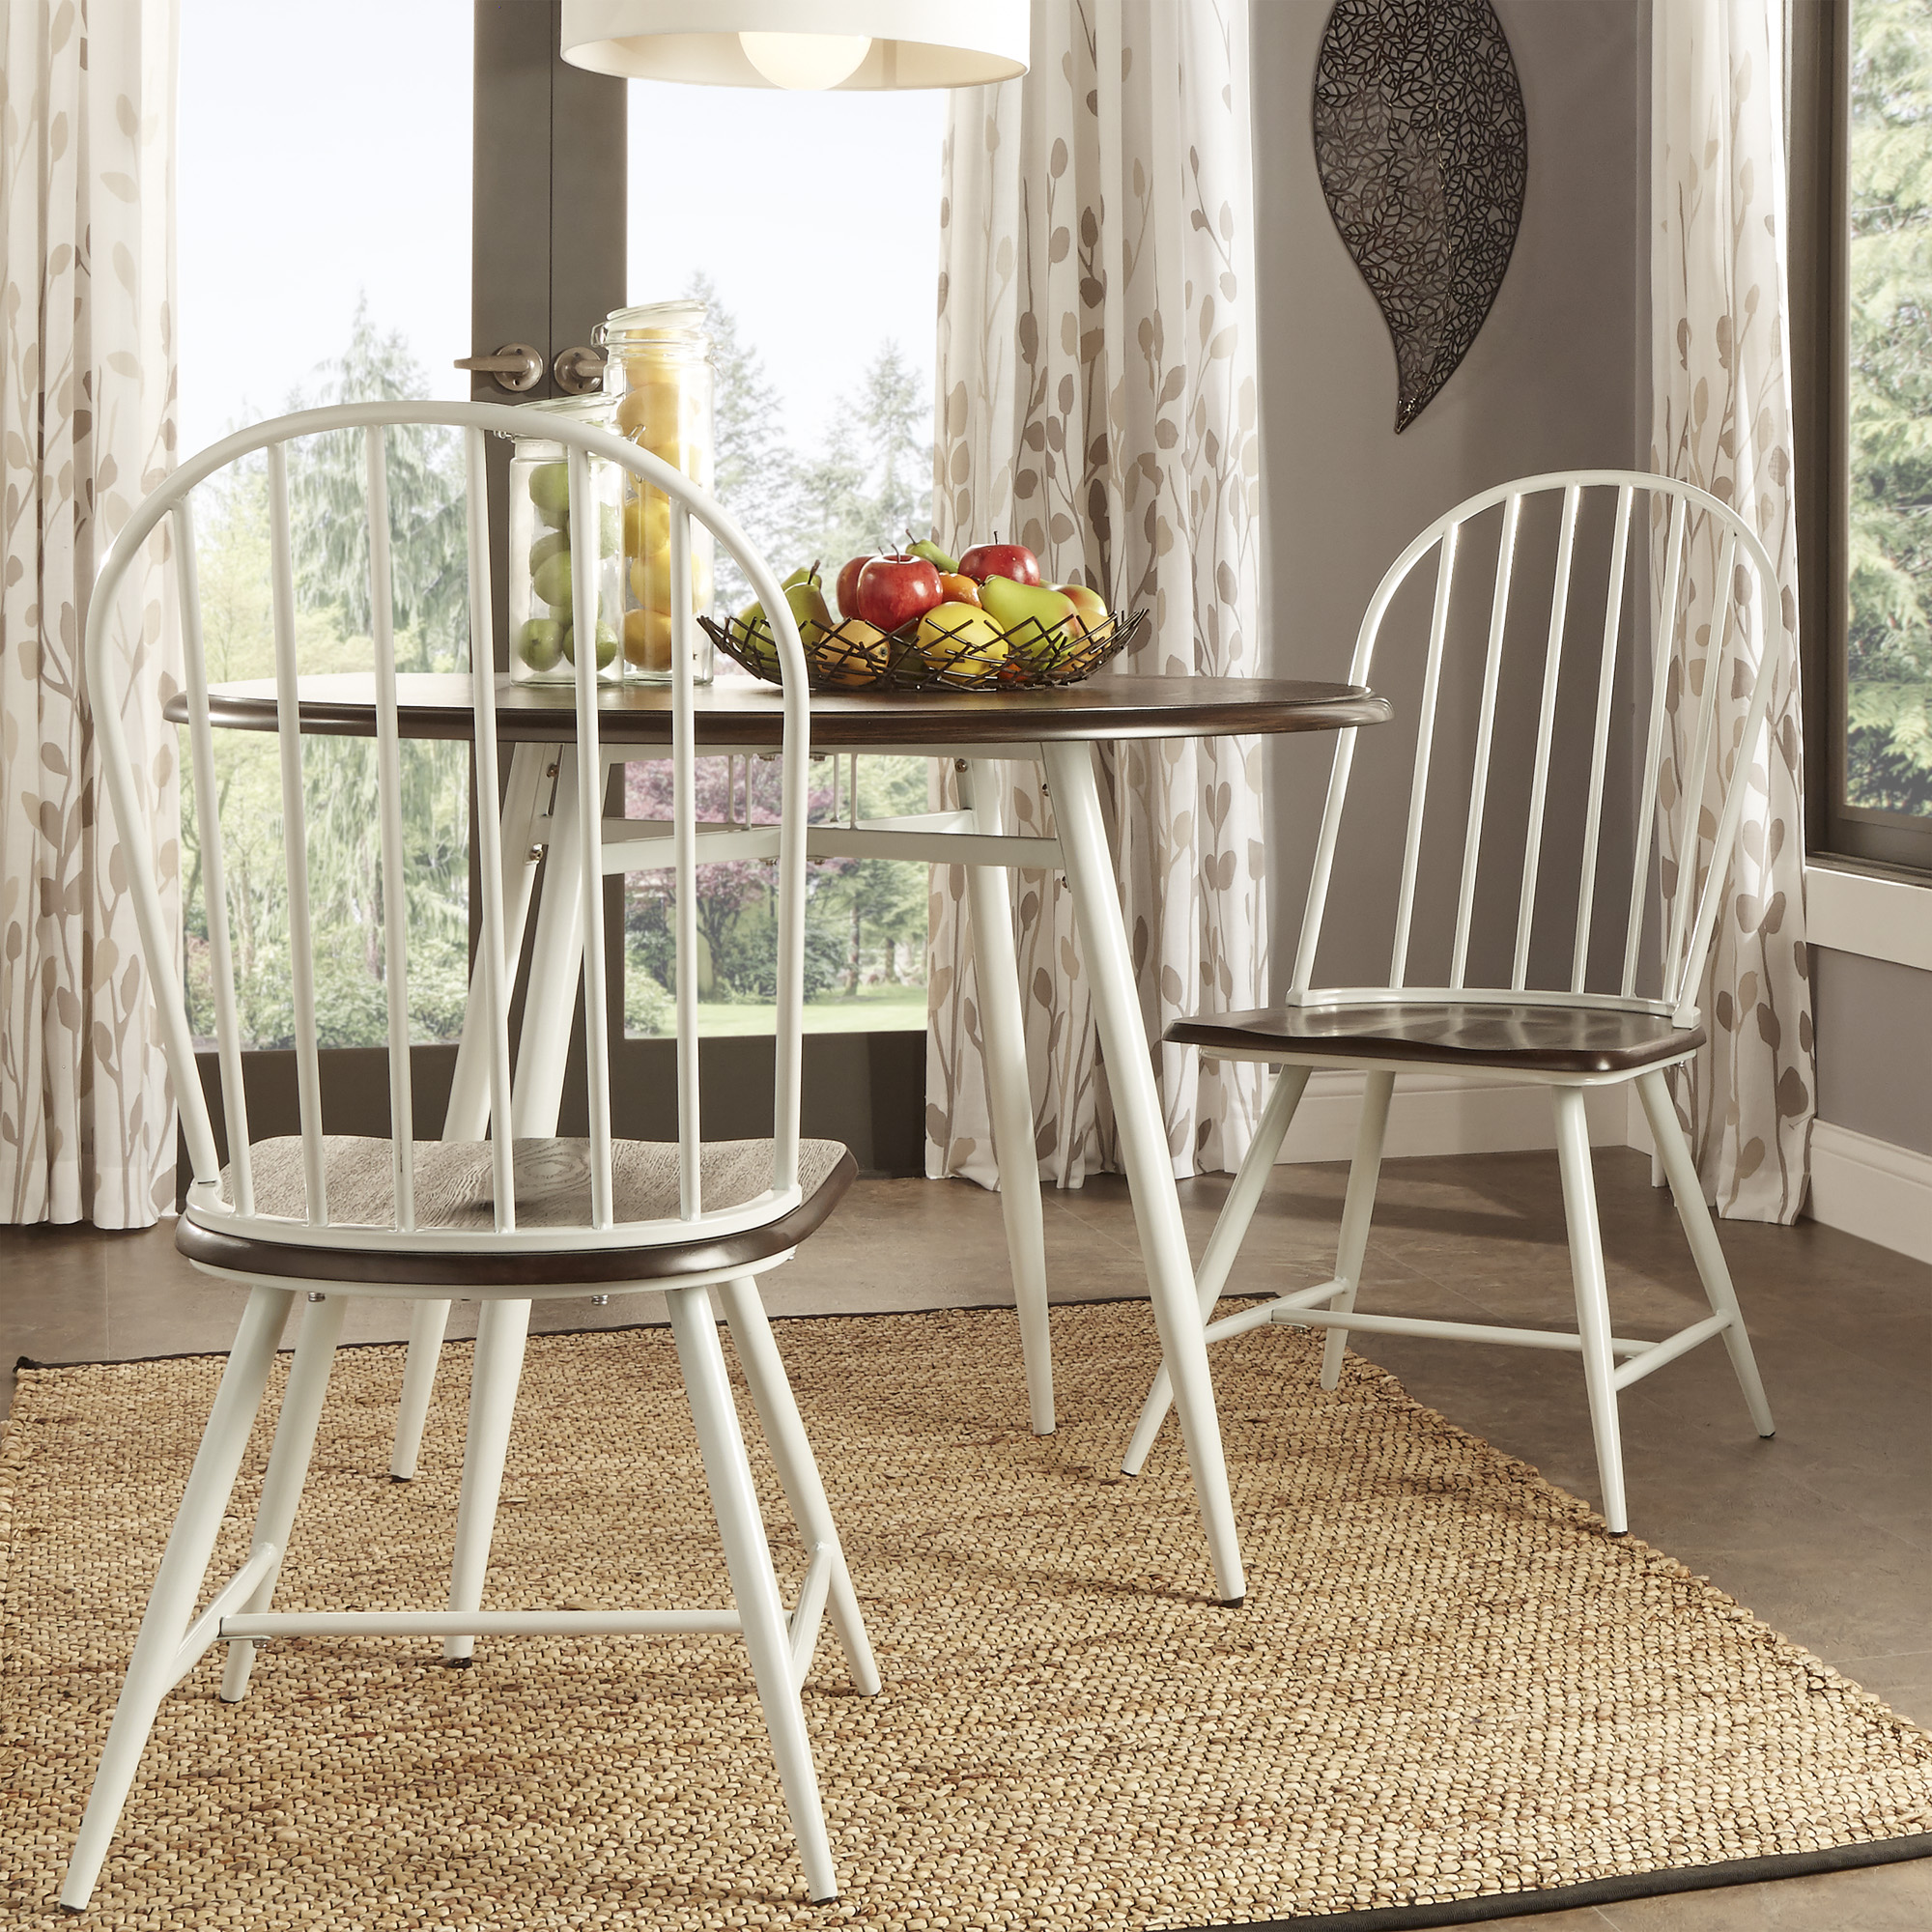 Two-Tone Spindle Windsor Dining Chairs (Set of 4)